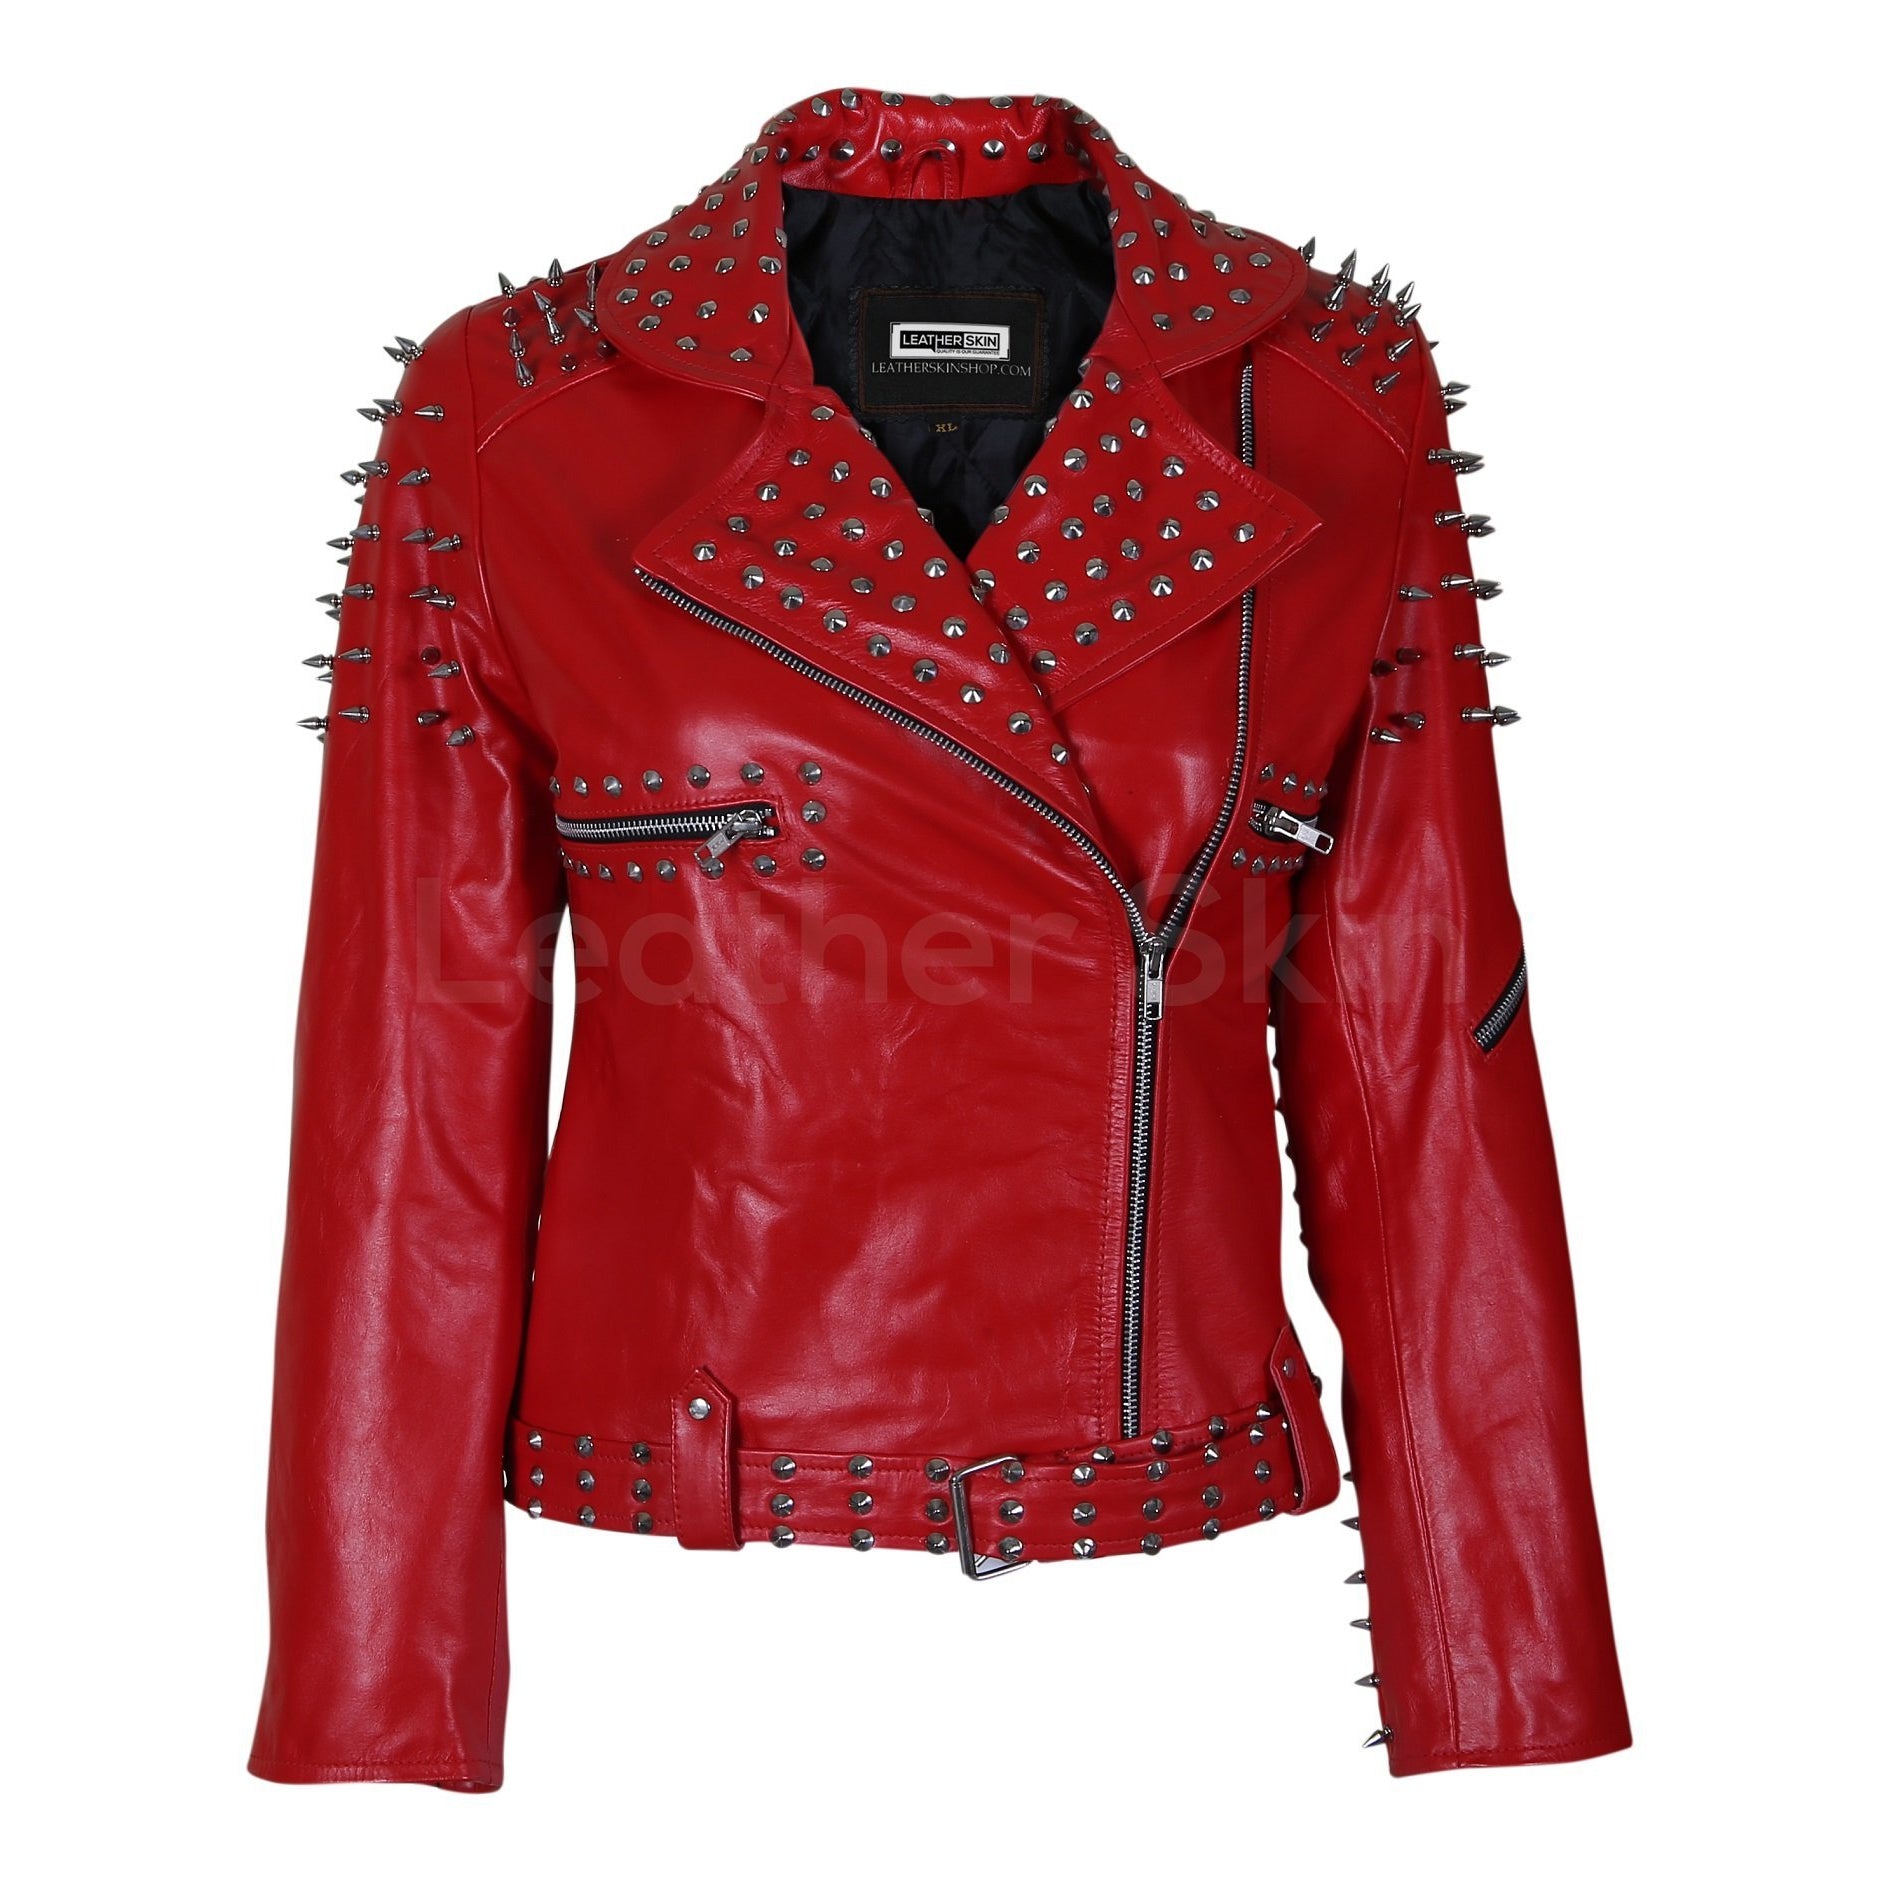 Spikes and Studded Leather Jacket for Men and Women in Real Leather -  Leather Skin Shop